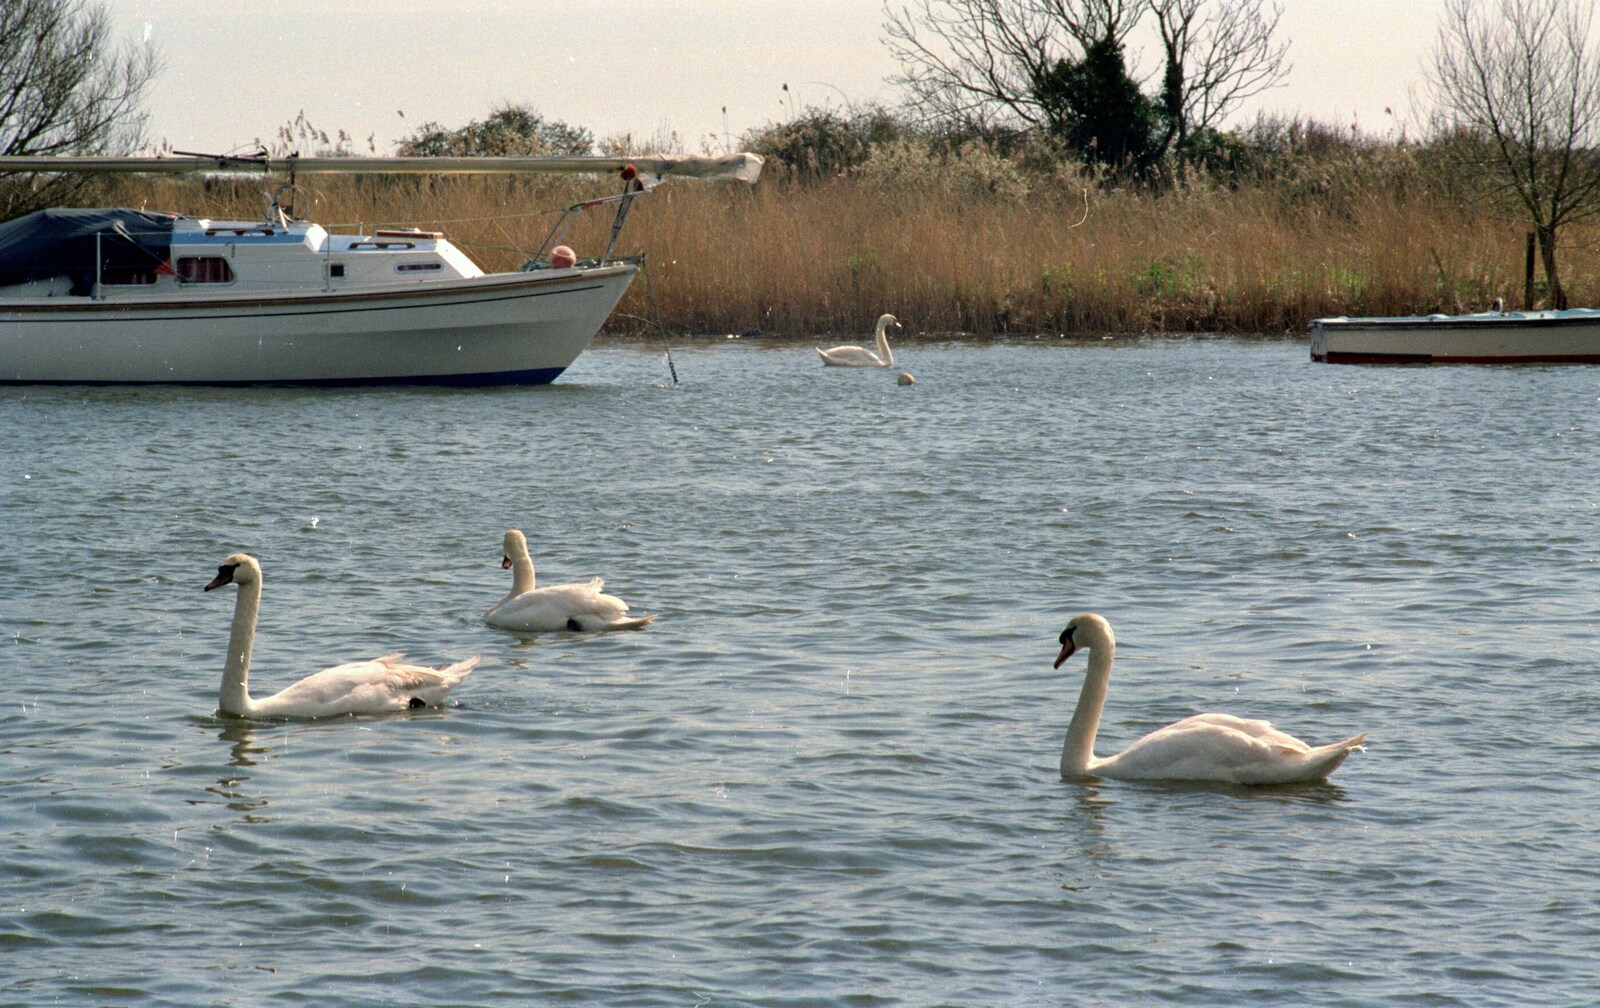 The Vineyard, Christchurch and Pizza, New Milton and the New Forest - 2nd April 1989: Swans on the River Stour, Christchurch